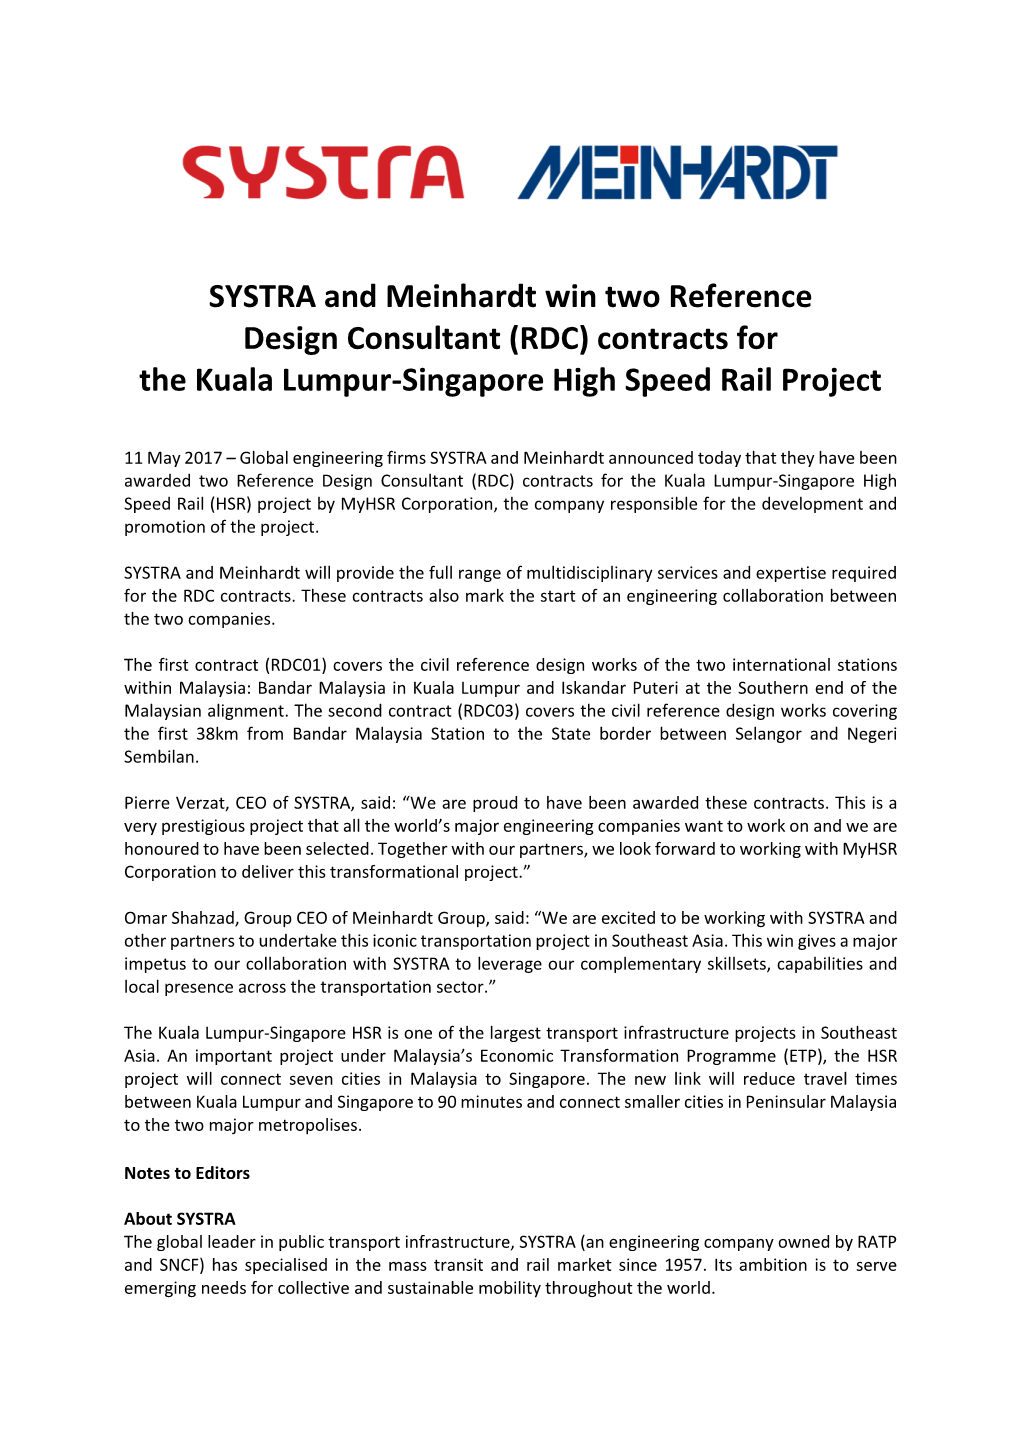 SYSTRA and Meinhardt Win Two Reference Design Consultant (RDC) Contracts for the Kuala Lumpur-Singapore High Speed Rail Project